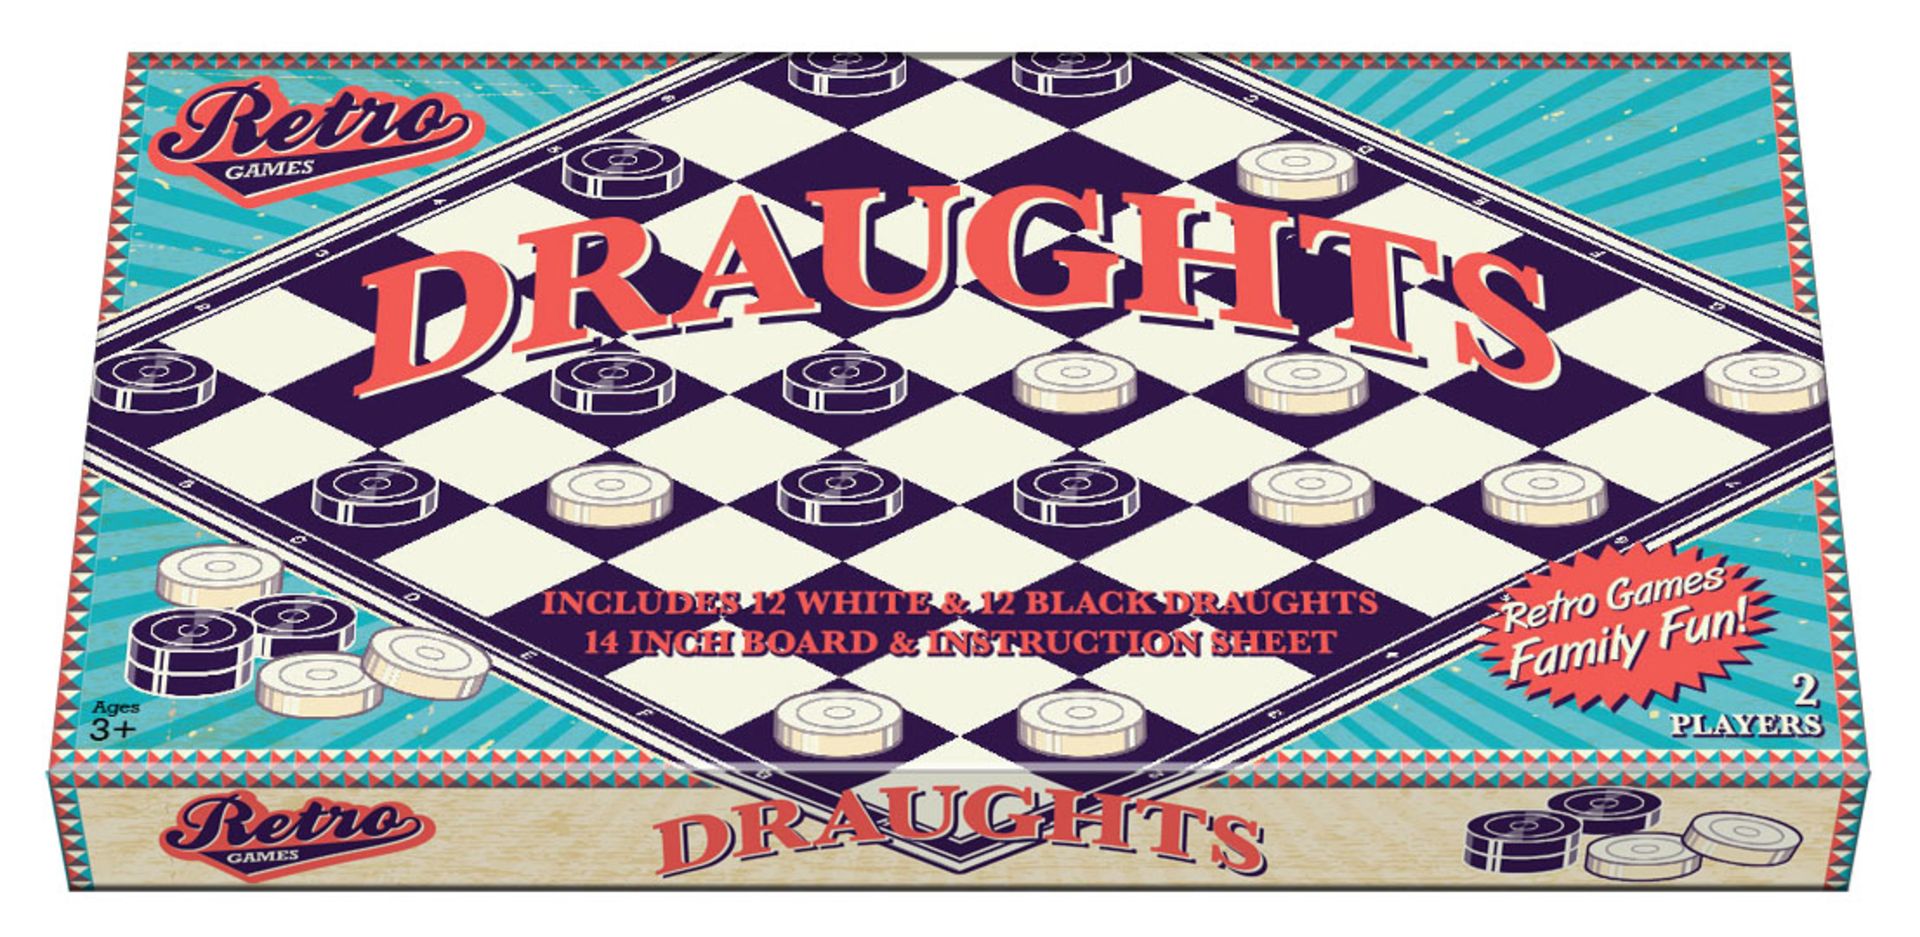 New Retro Games Draughts Set 14inch Board